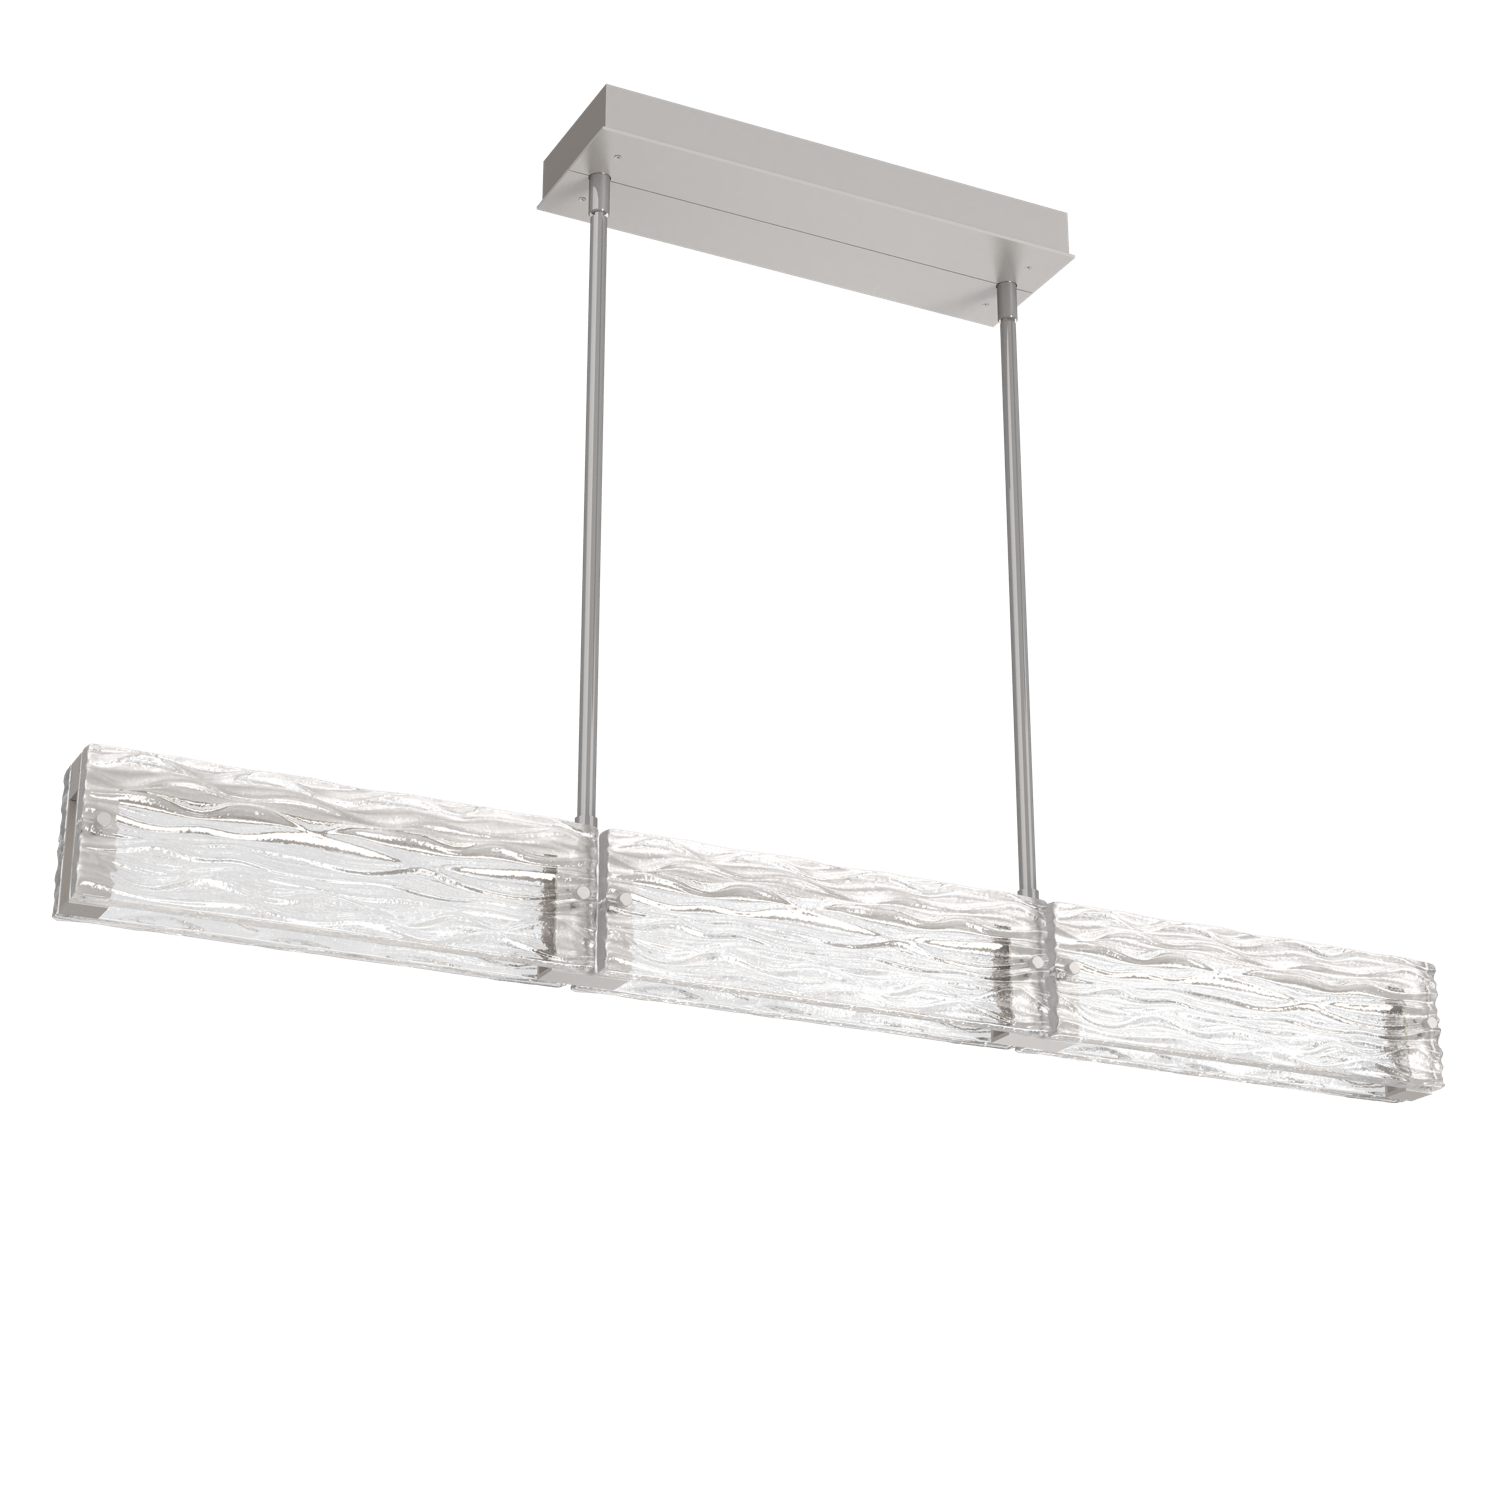 PLB0090-43-BS-TT-Hammerton-Studio-Tabulo-43-inch-linear-chandelier-with-metallic-beige-silver-finish-and-clear-tidal-cast-glass-shade-and-LED-lamping